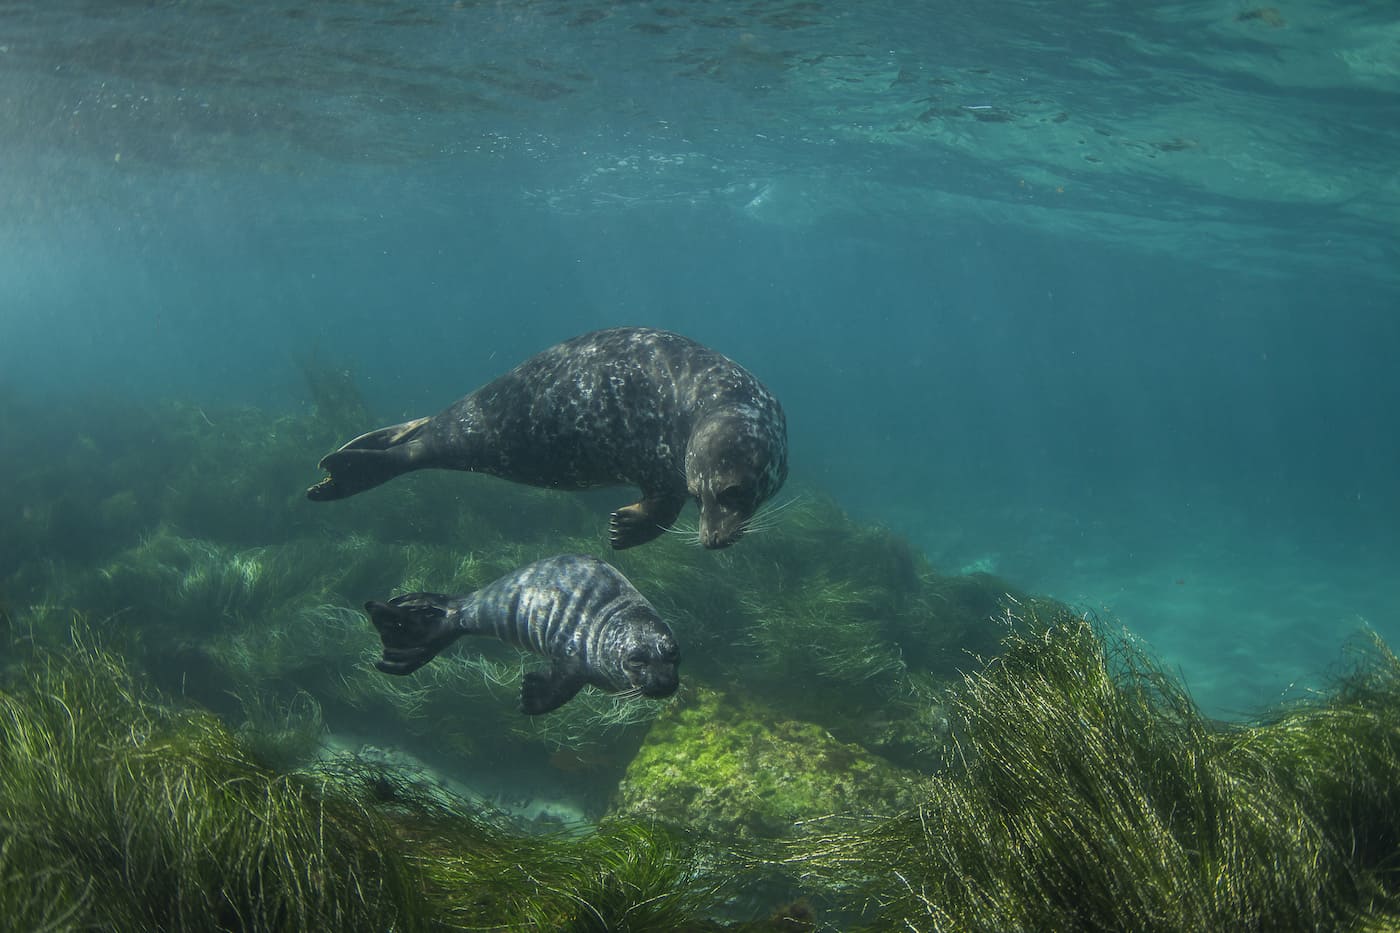 Mother seal with her pup in seagrass.© Ocean Image Bank / Jeff Hester